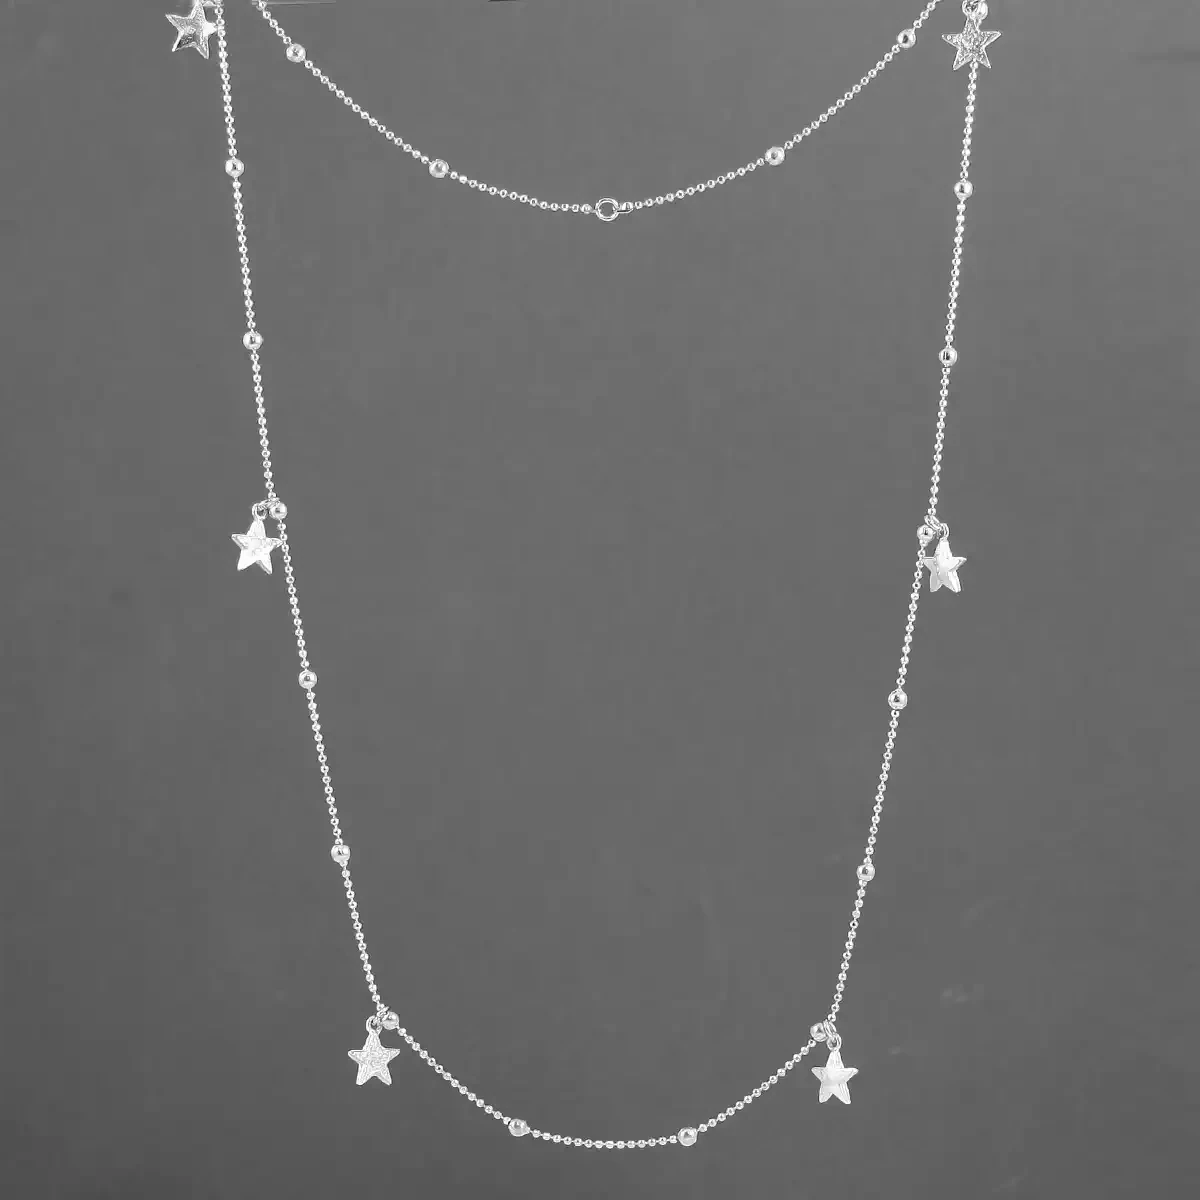 Delicate Pewter Ball Chain Necklace - Star by Metal Planet